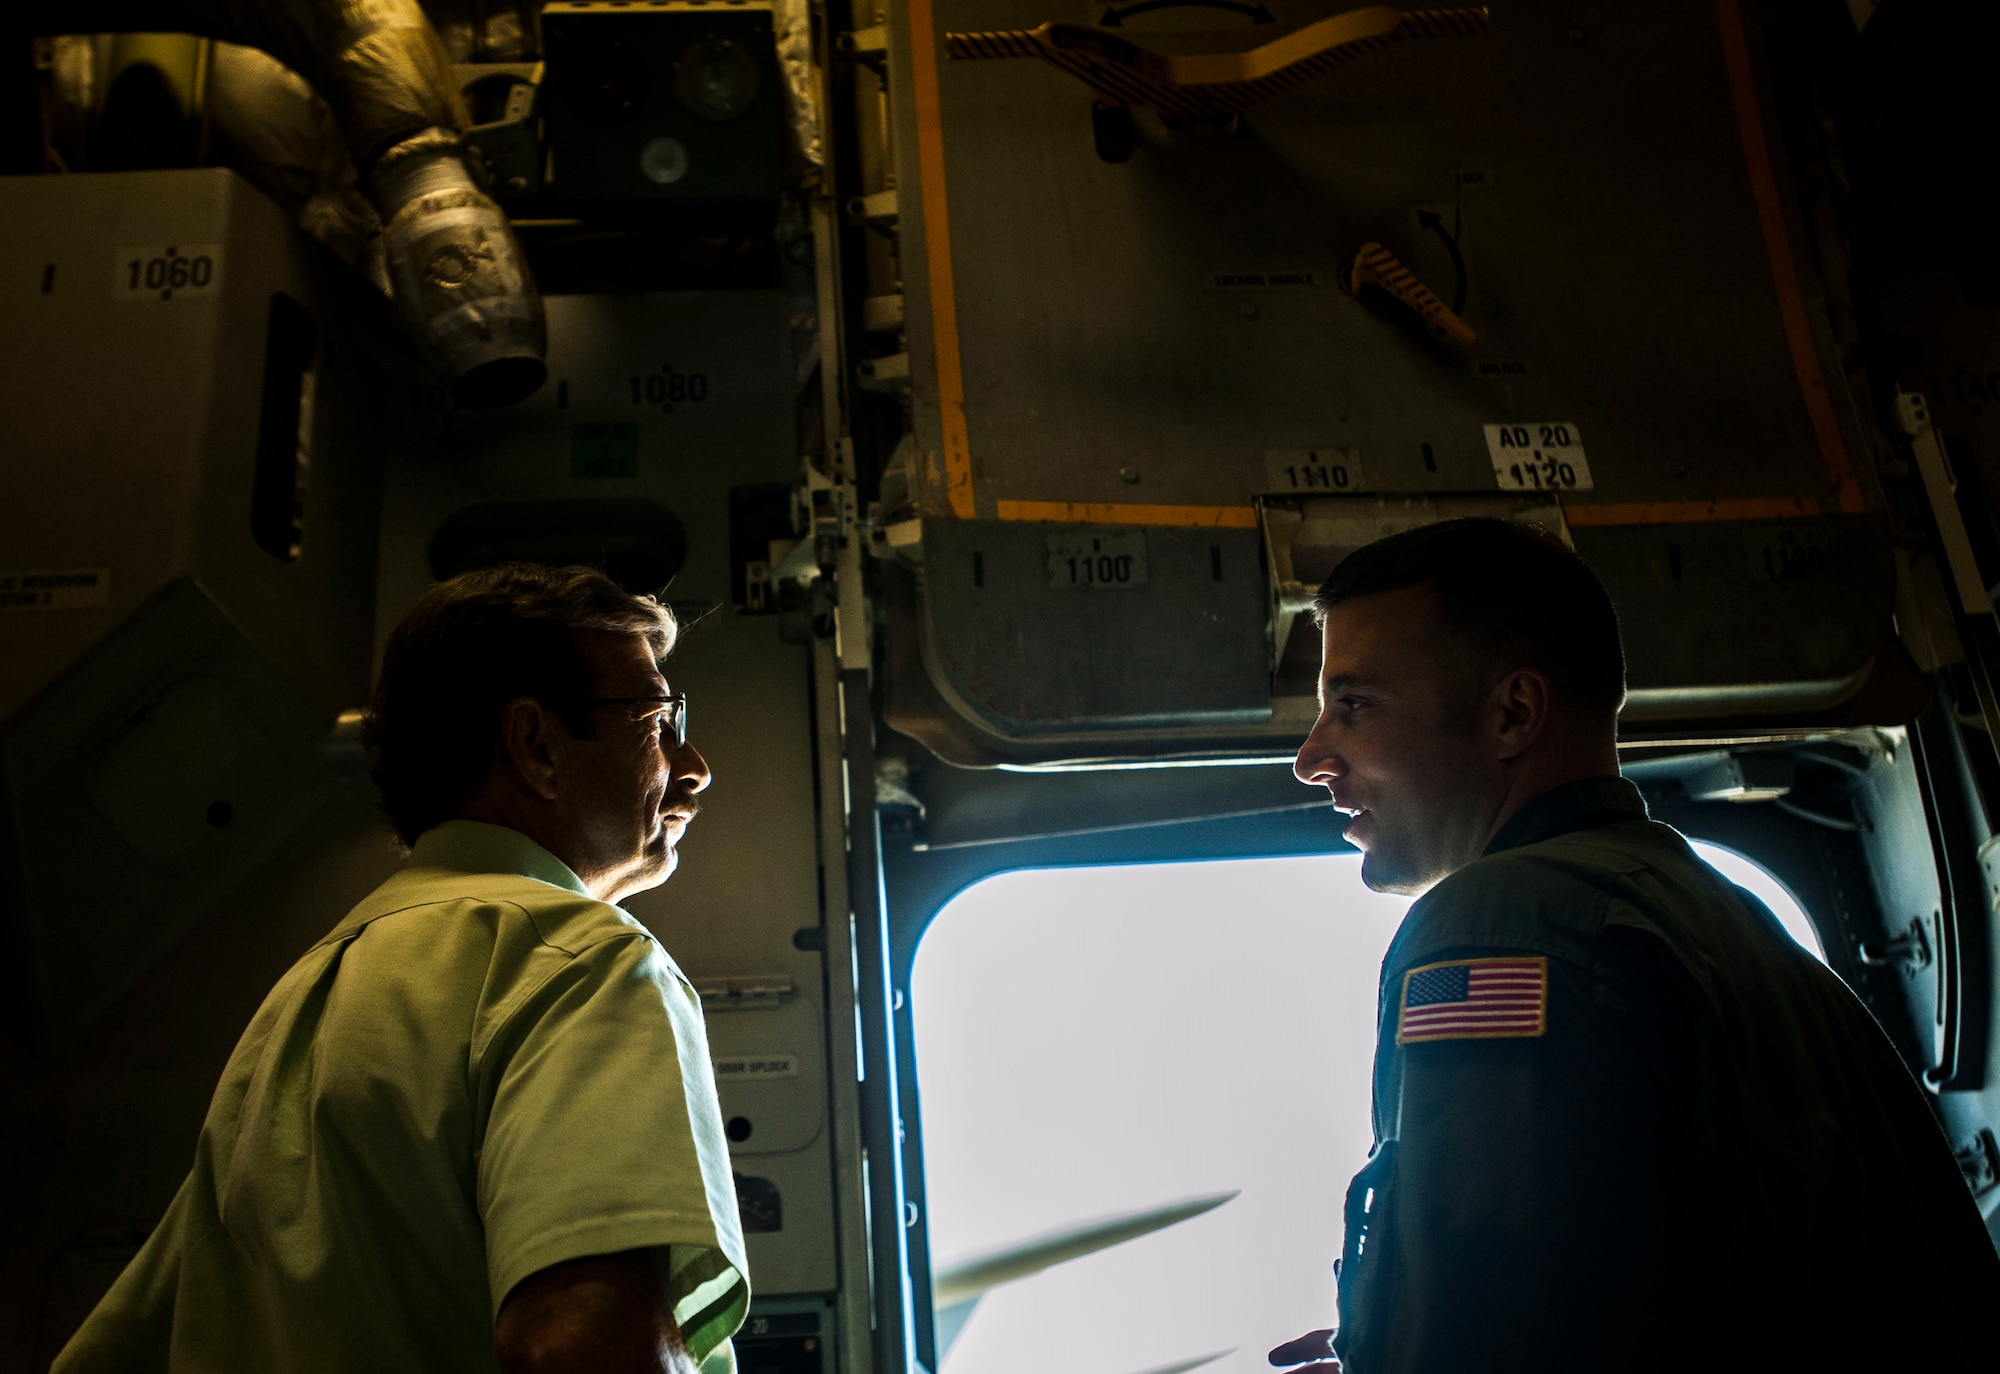 C-17 flight nostalgic for father-son Airmen > Air Force > Article